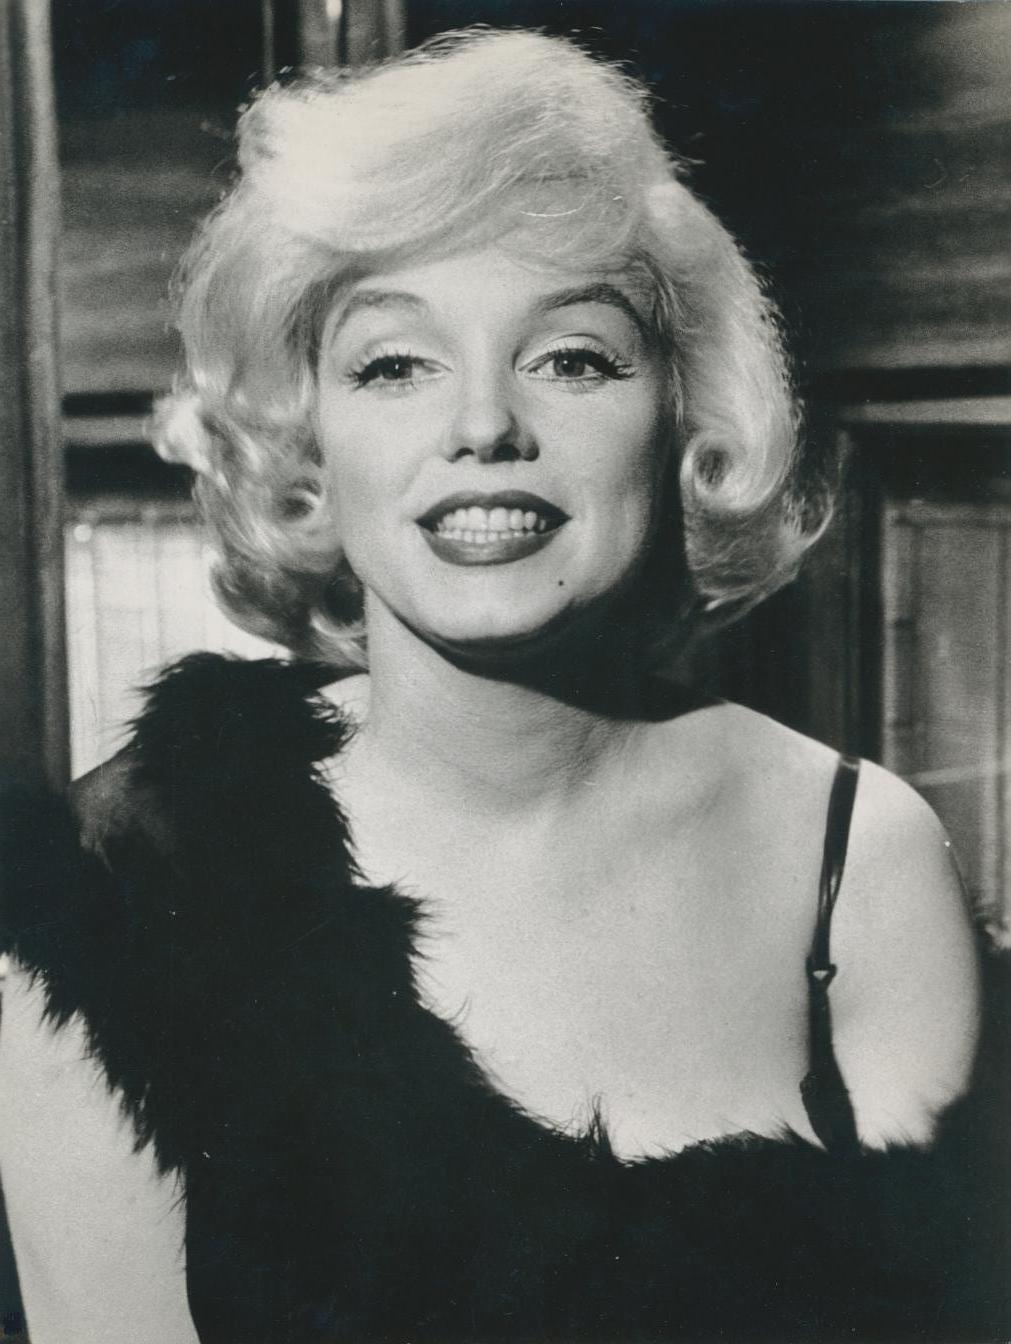 Unknown Black and White Photograph - Marilyn Monroe "Some Like It Hot", USA, 1958